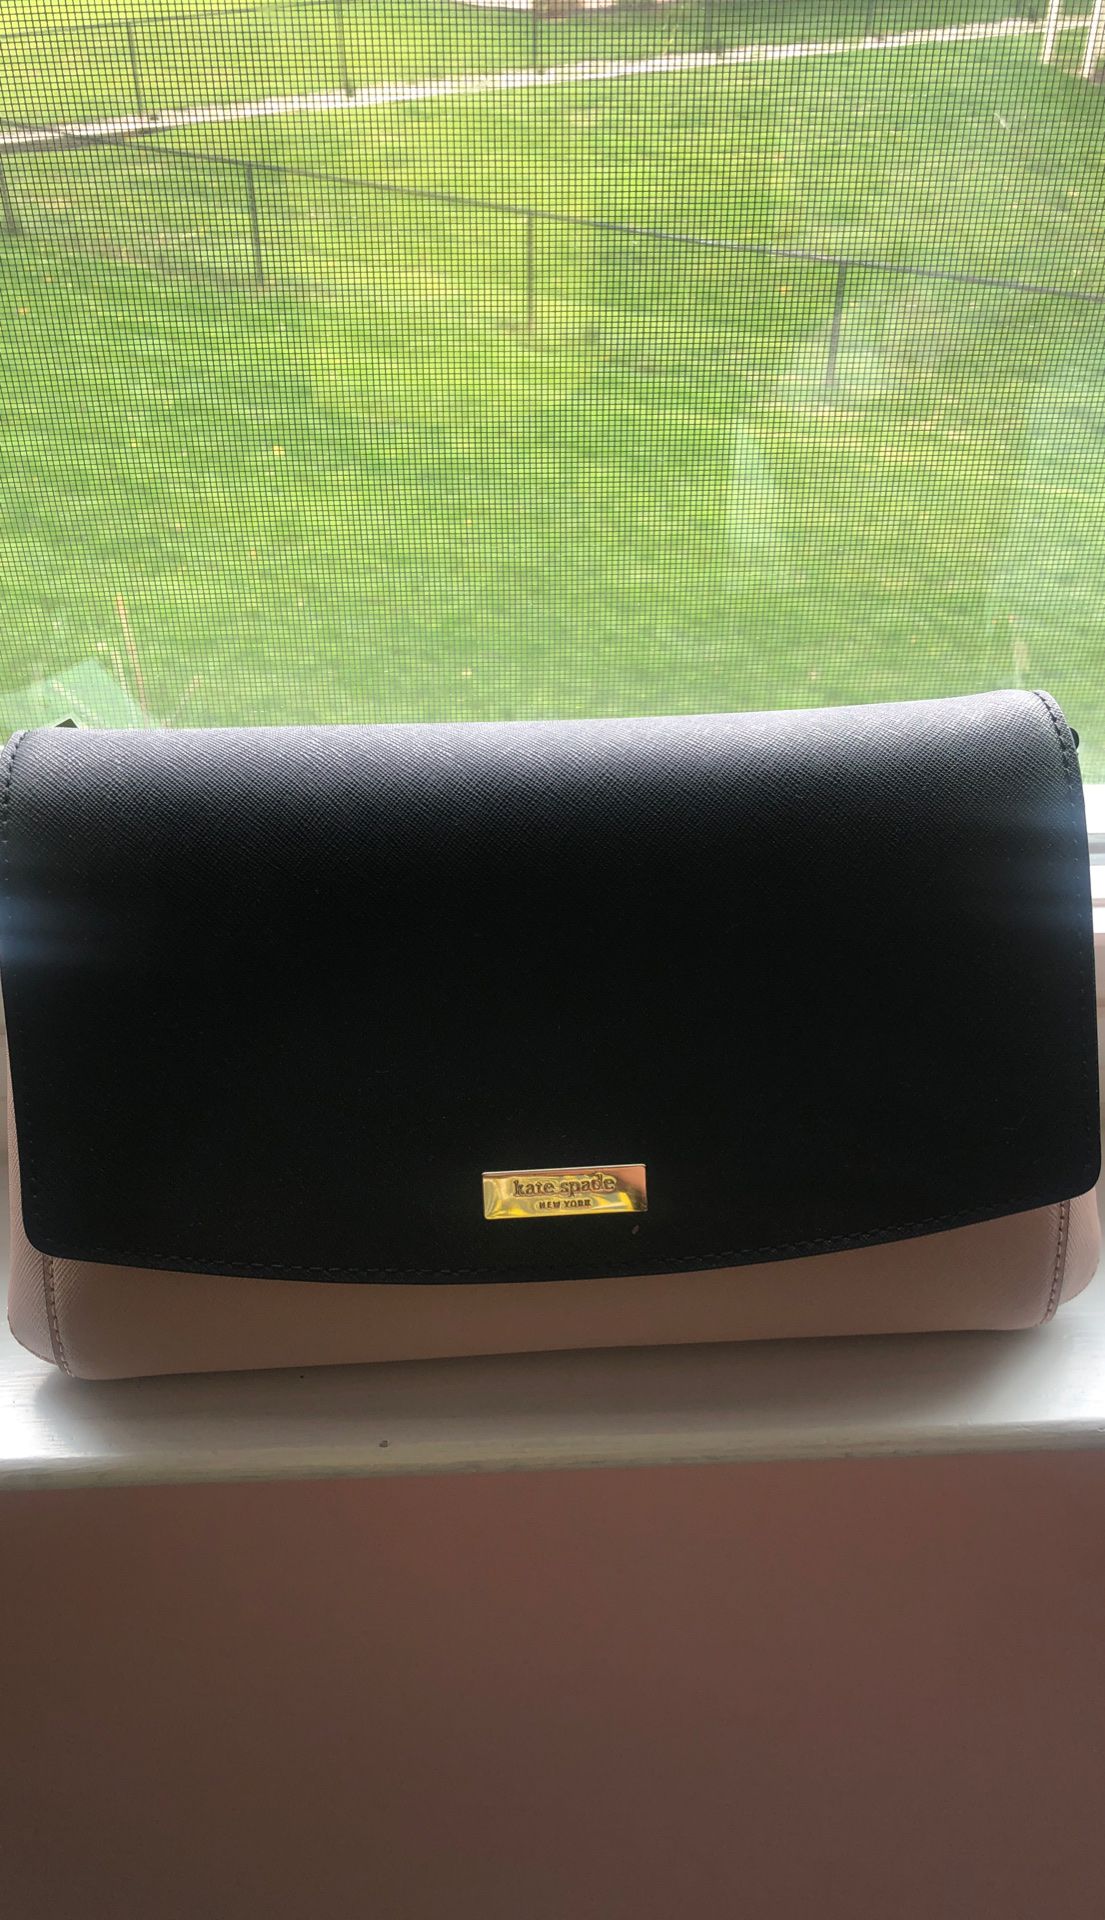 NEW Kate Spade Purse - Cross Body with tag!